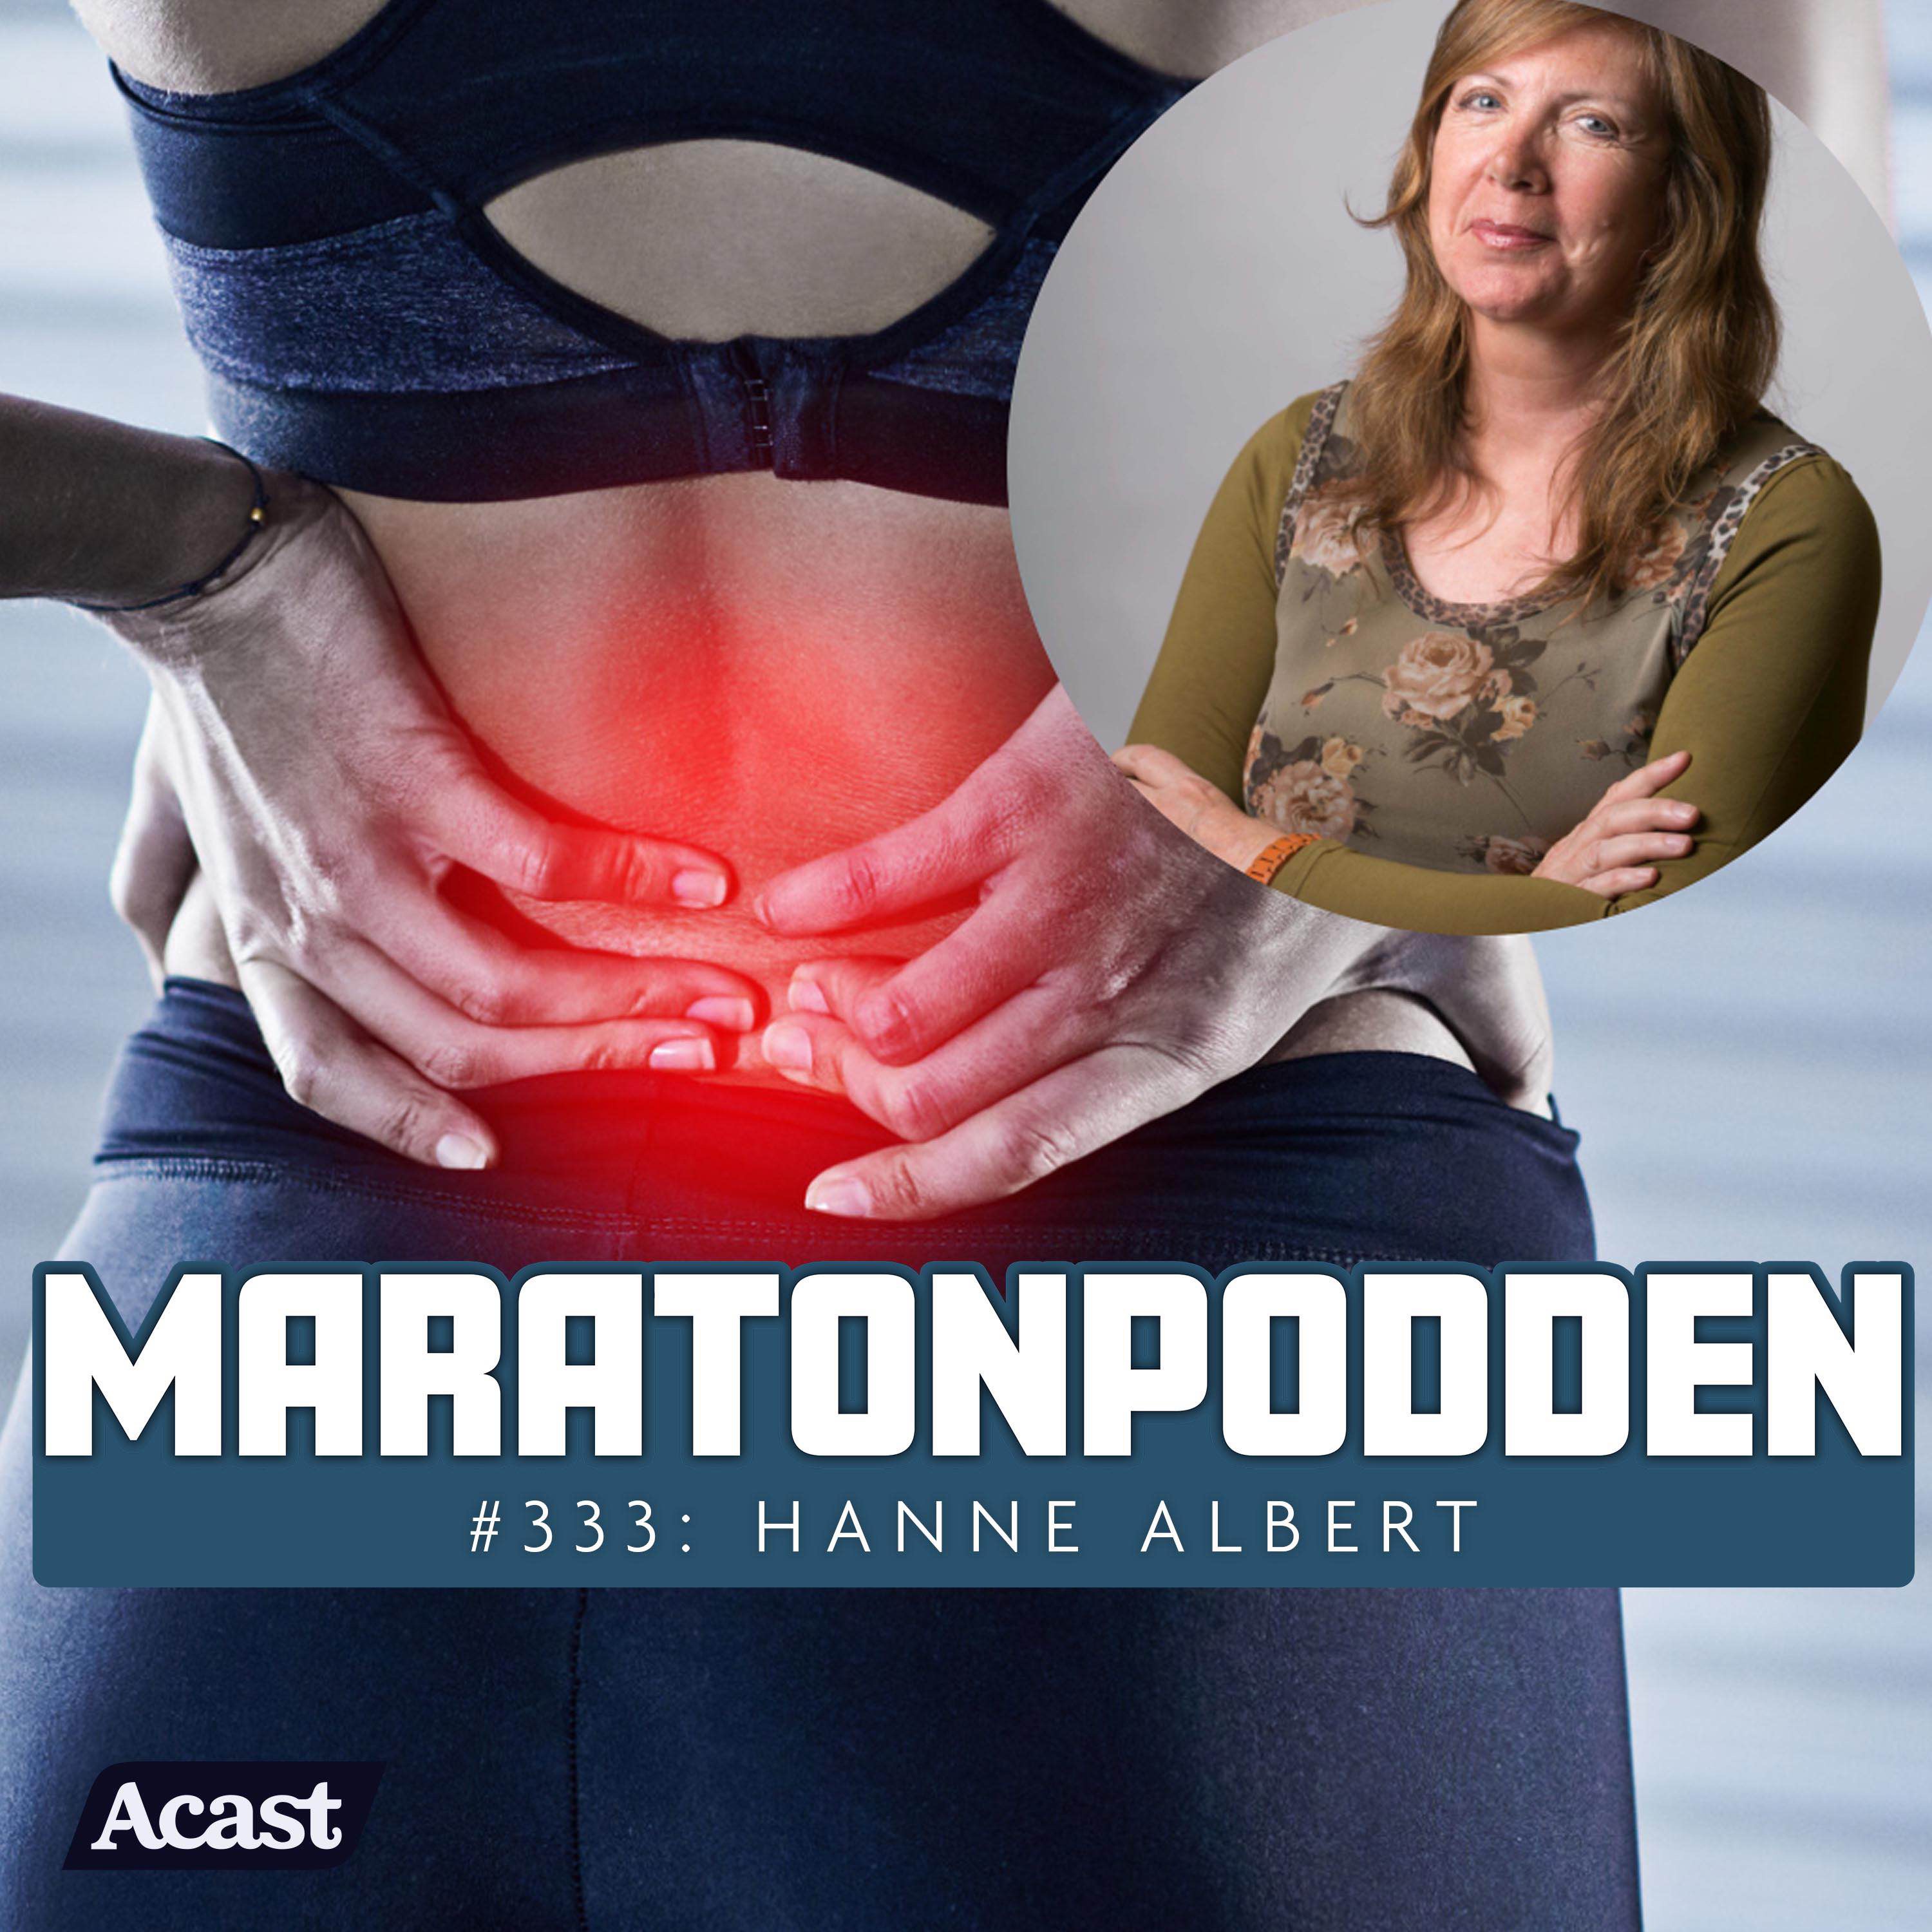 #333: Modic changes, the unknown cause behind lower back pain with Hanne Albert